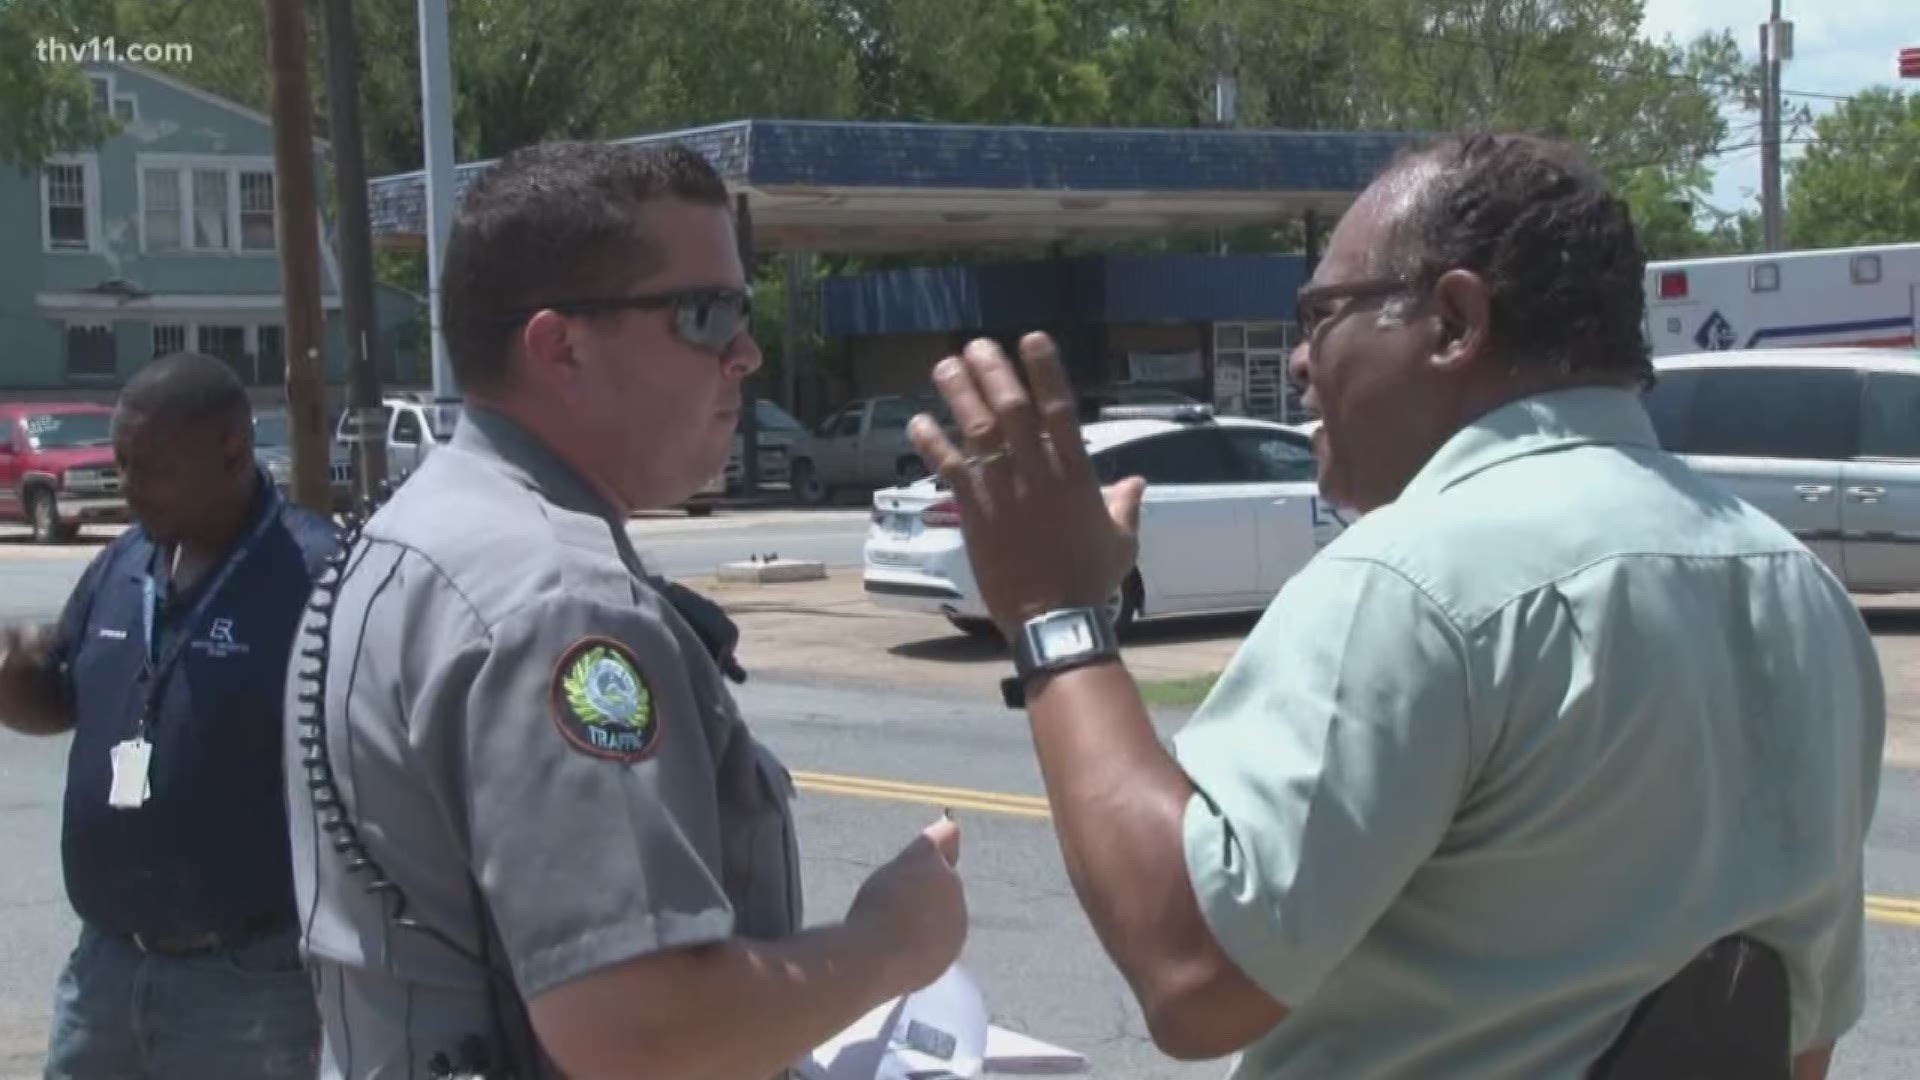 The Little Rock Police Department brought back a special traffic program that gets a hand from civilian officers.